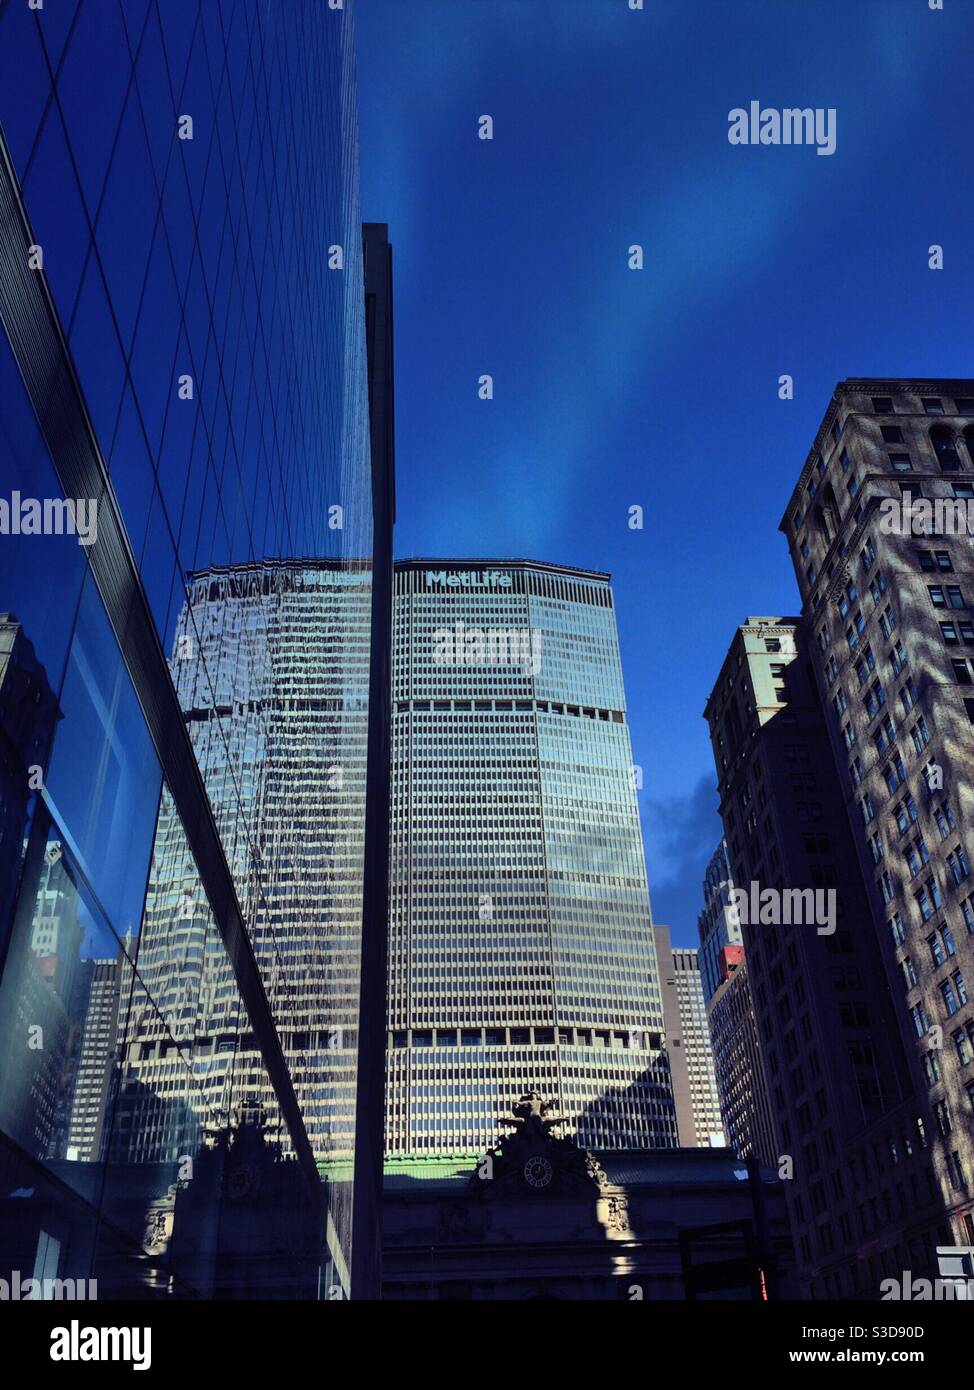 The MetLife building in Midtown Manhattan reflected in a glass façade of another building, NYC, USA Stock Photo